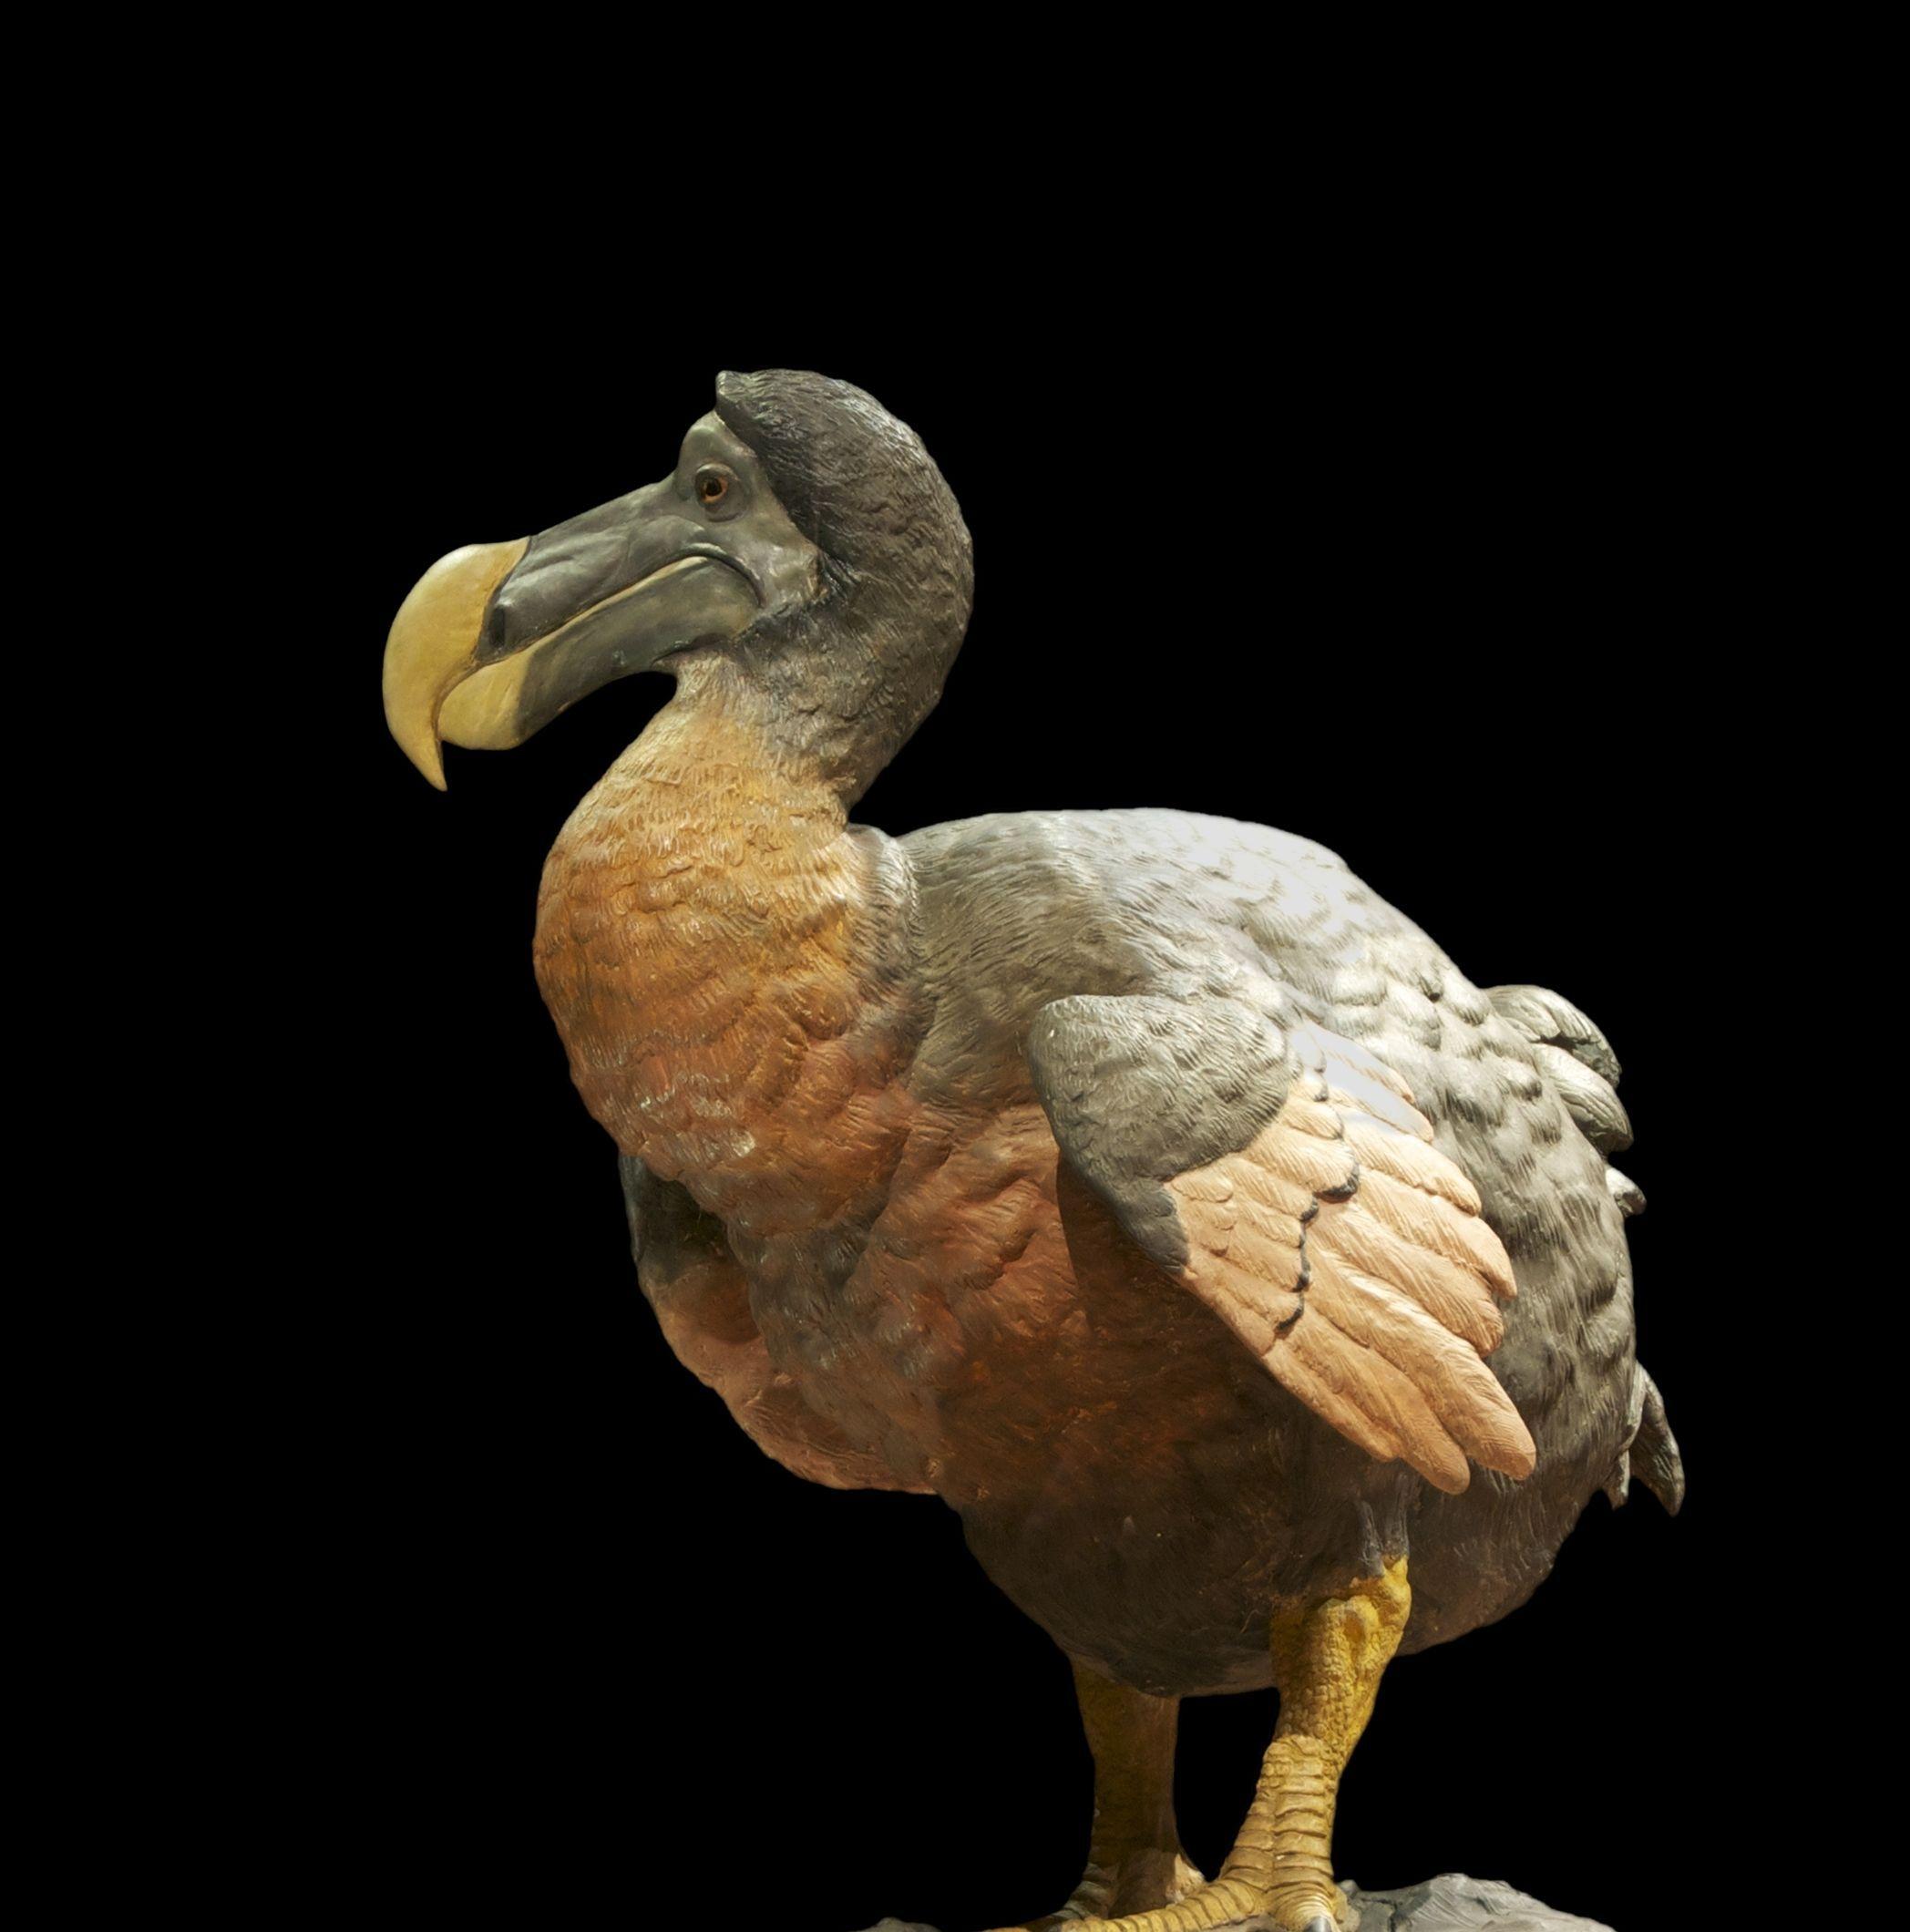 a picture of a real dodo bird